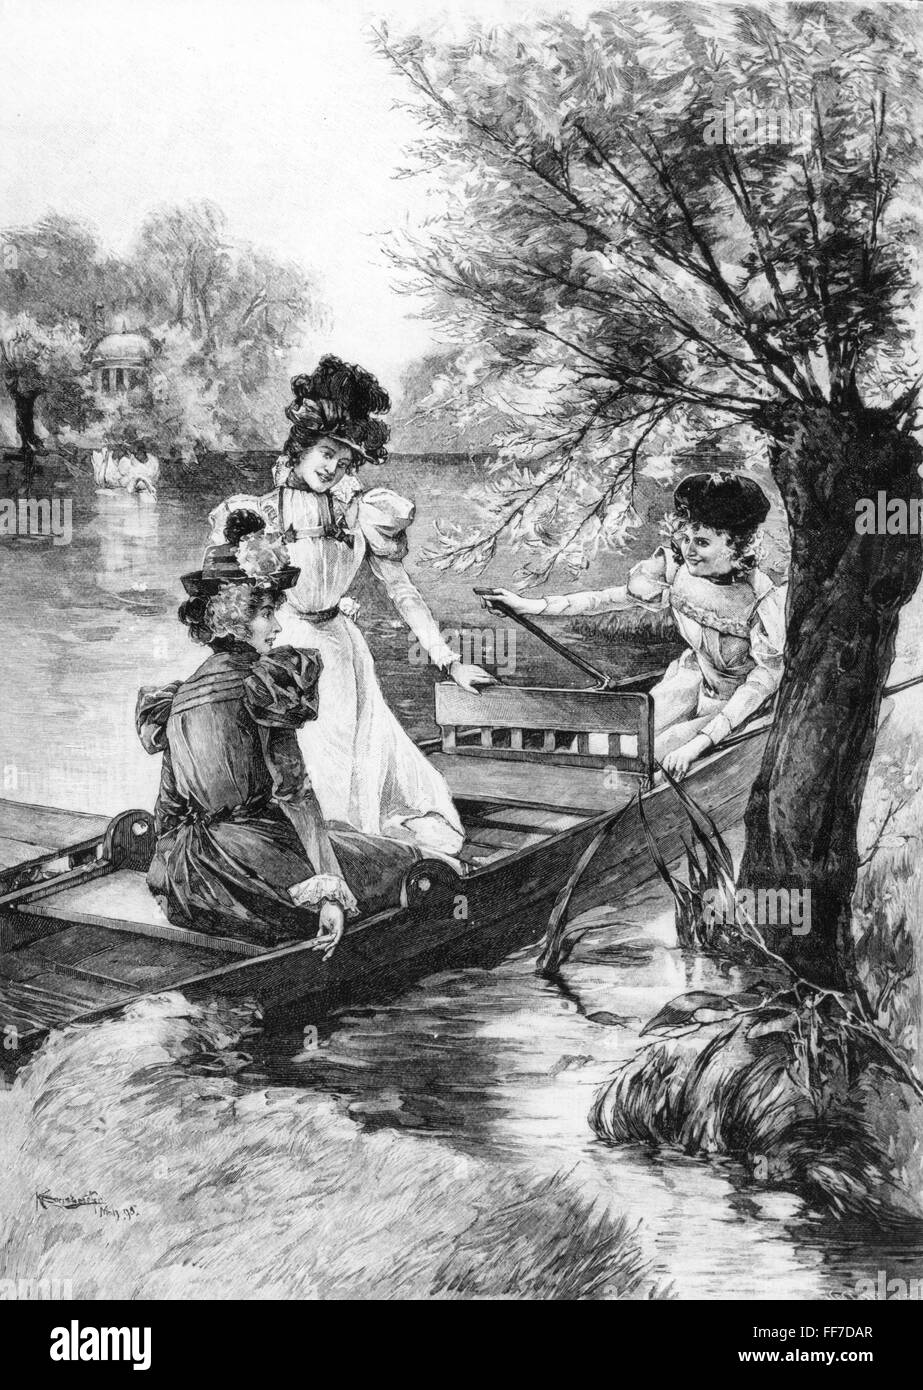 fashion,early 20th century / turn of the century,fashionably dreassed ladies on boat trip,after drawing by Konrad Egersdörfer(1868 - 1914),1898,wood engraving,circa 1900,19th century,graphic,graphics,ladies' fashion,clothes,outfit,outfits,dresses,reform dress,hat,hats,fashion for women,women's clothing,headpiece,headpieces,half length,sitting,sit,boats,rowboat,rowing boat,rowboats,lake,lakes,tree,trees,willow,willows,leisure time,free time,spare time,at the turn of the 19th / 20th century,boat trip,boat trips,historic,,Additional-Rights-Clearences-Not Available Stock Photo